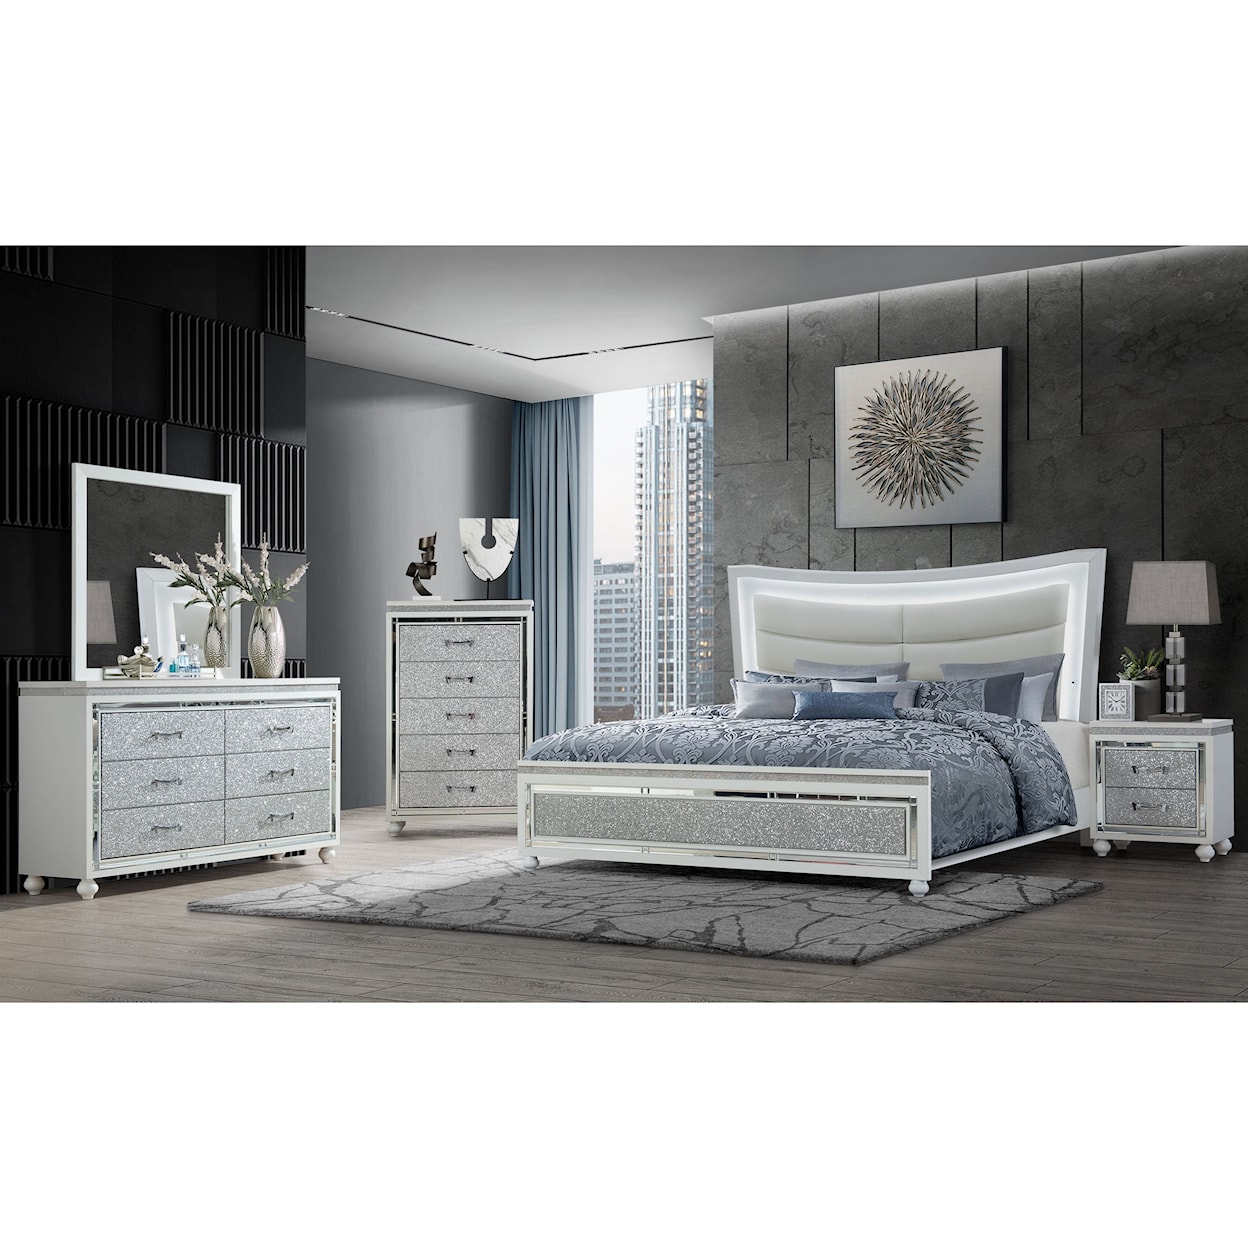 Global Furniture Collete Full Bed